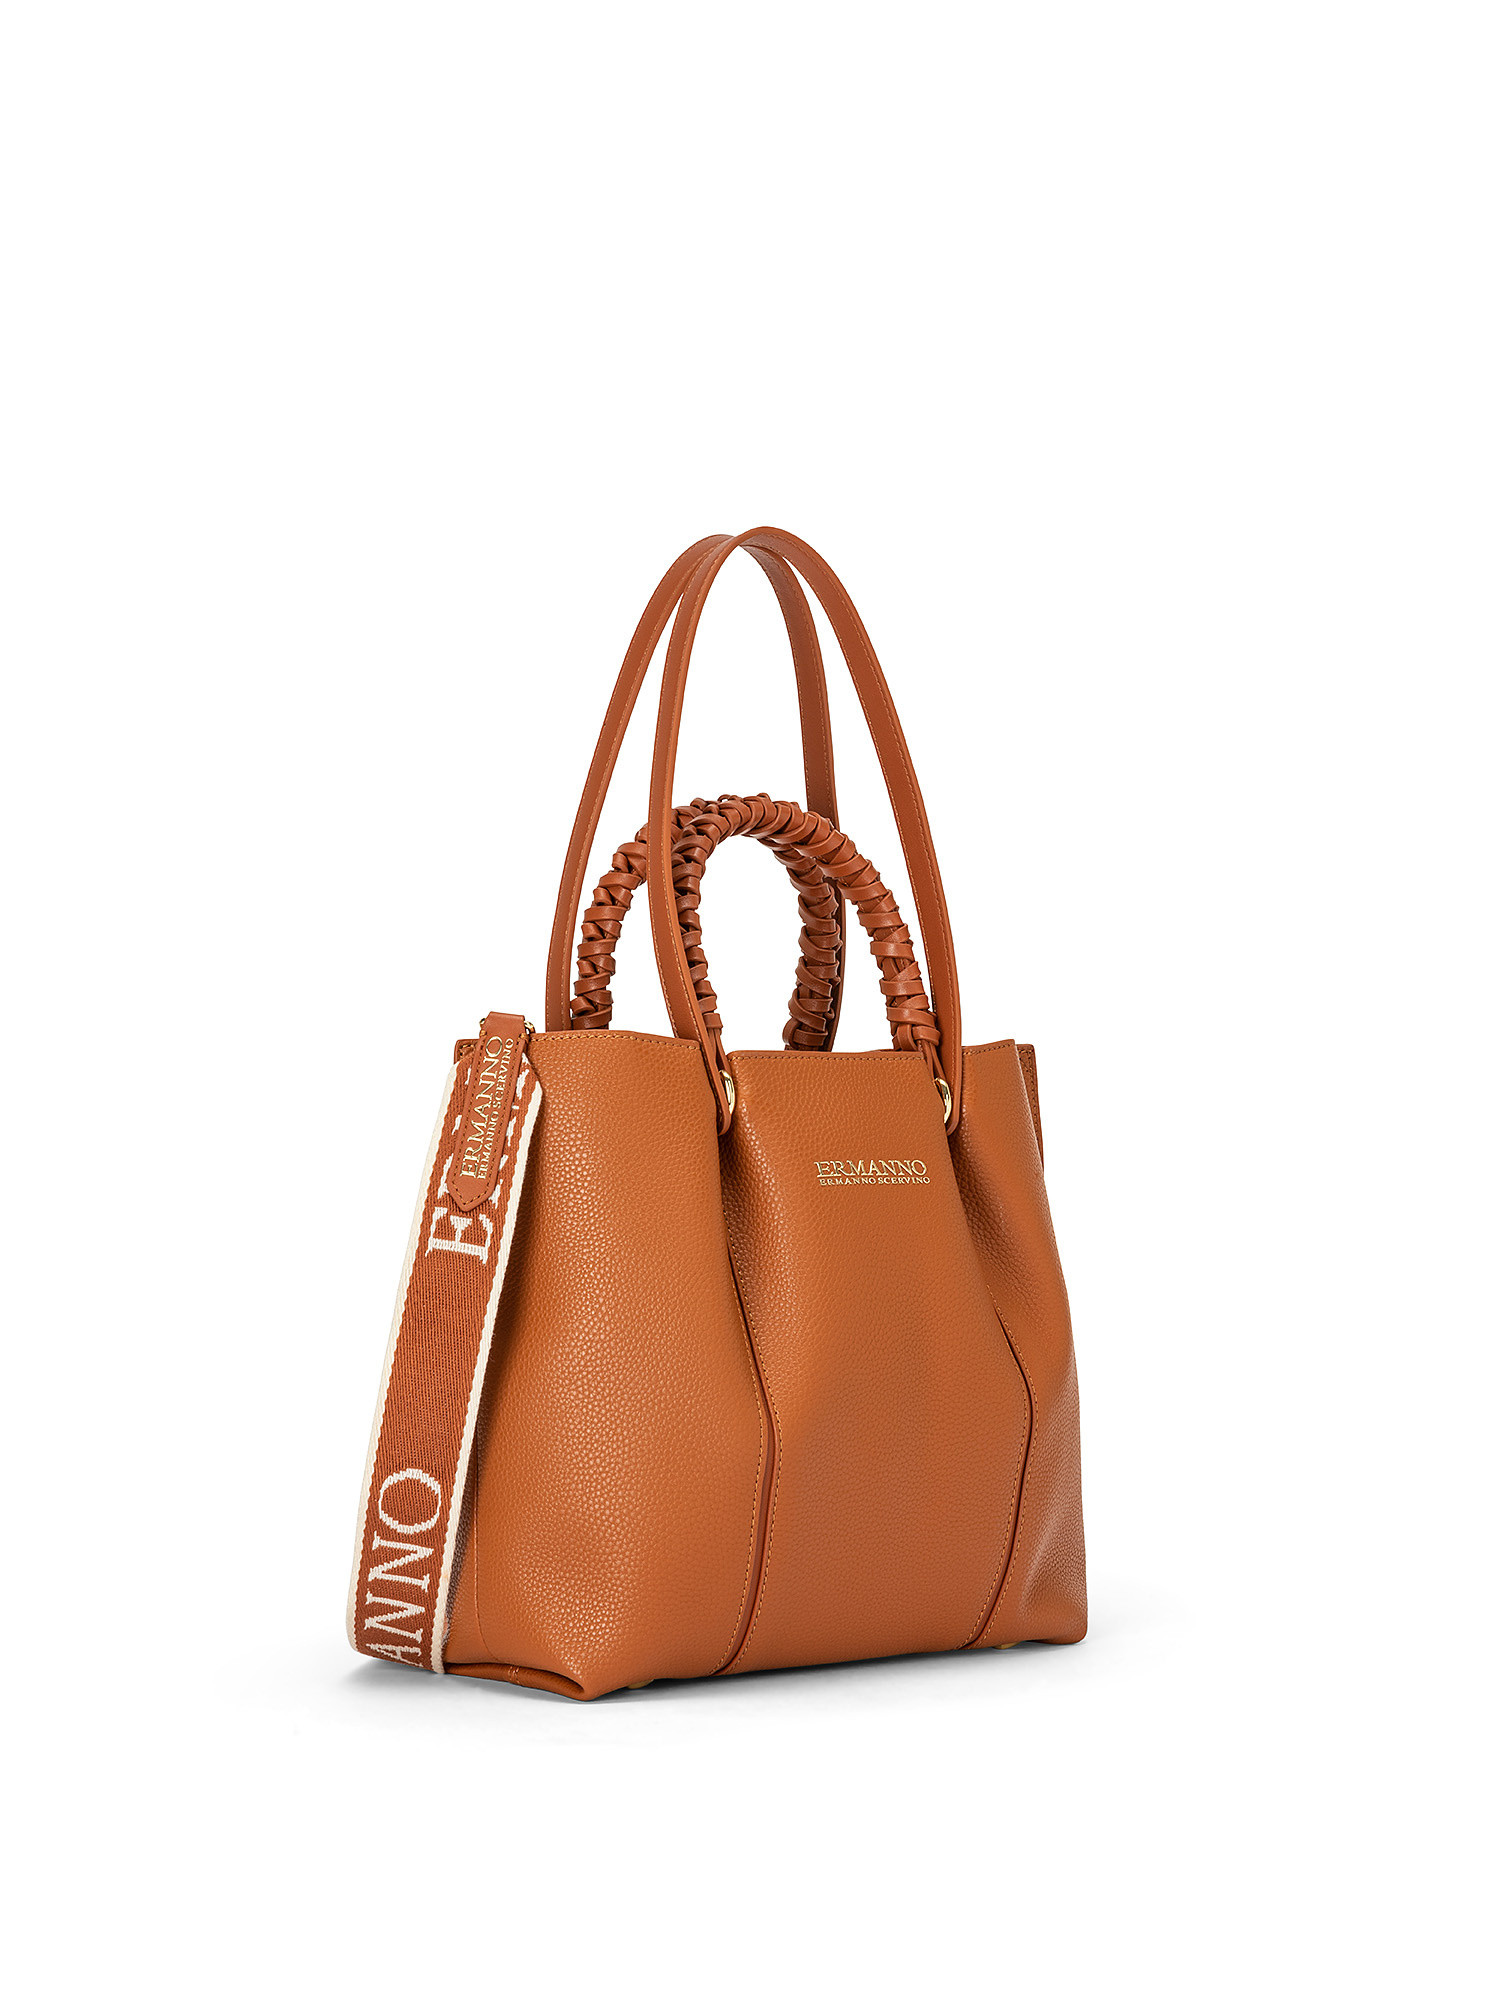 Small Marion bag, Brown, large image number 1